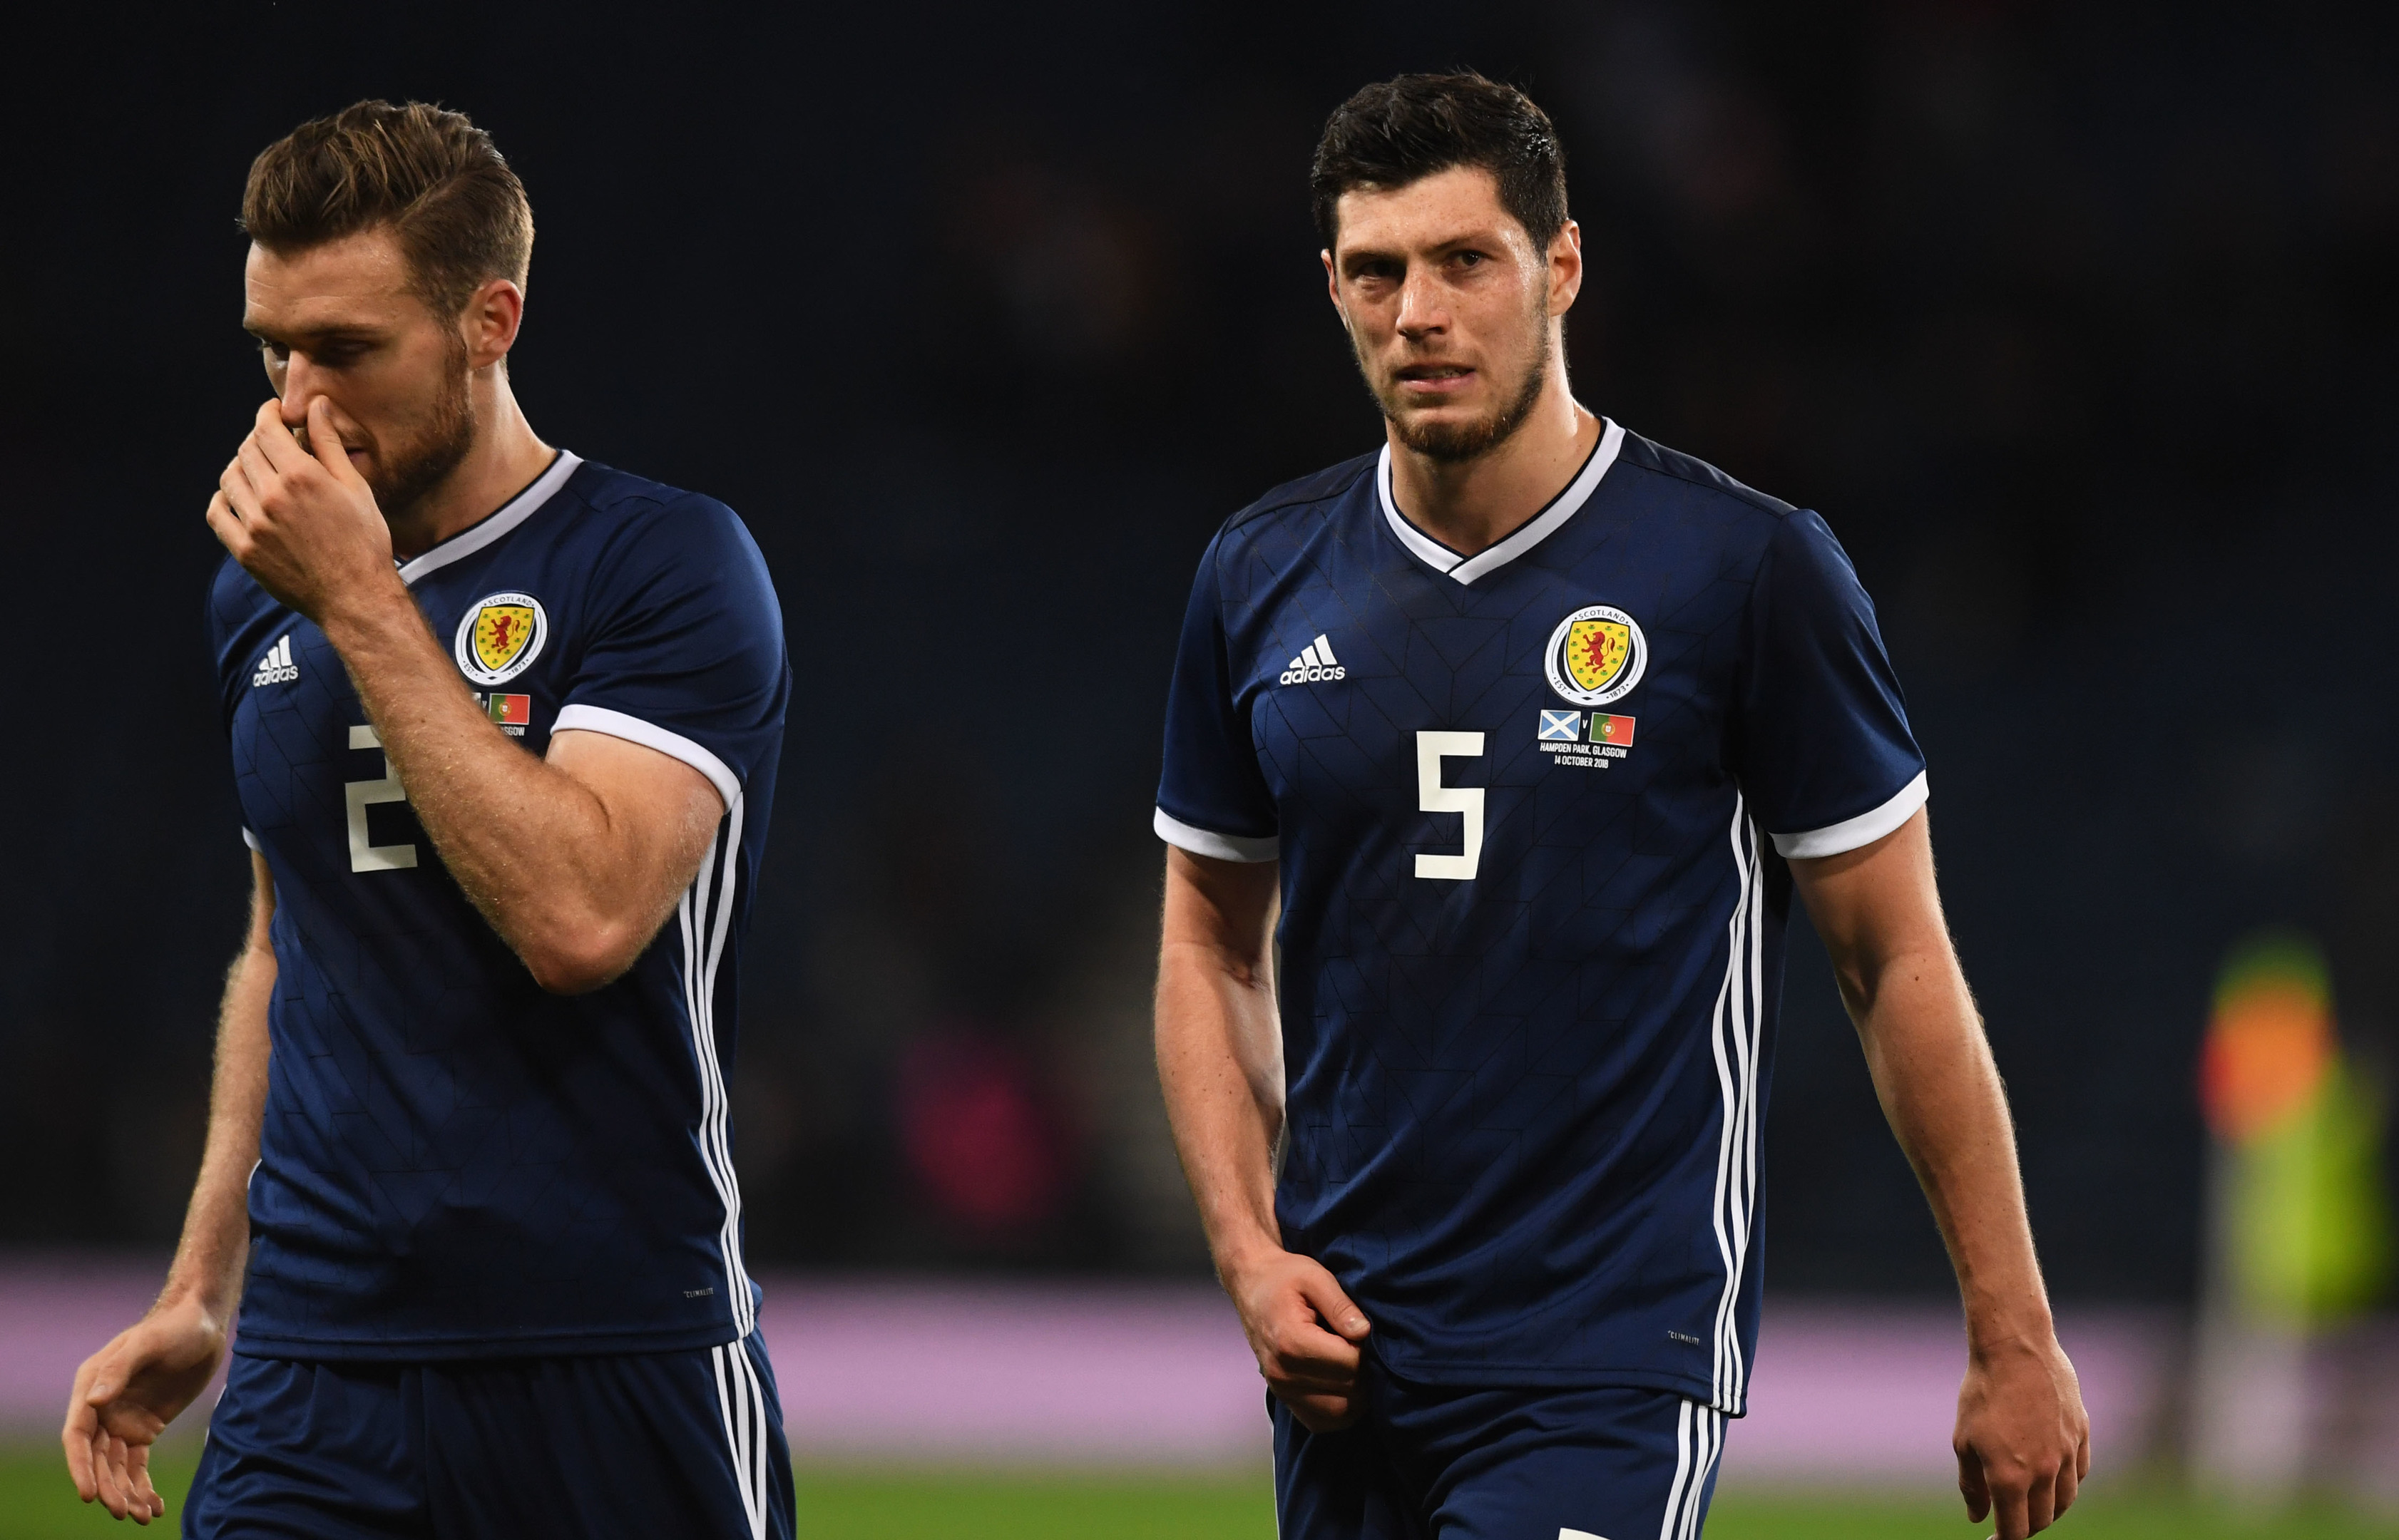 Scott McKenna missed a golden opportunity to open his account for Scotland against Portugal.